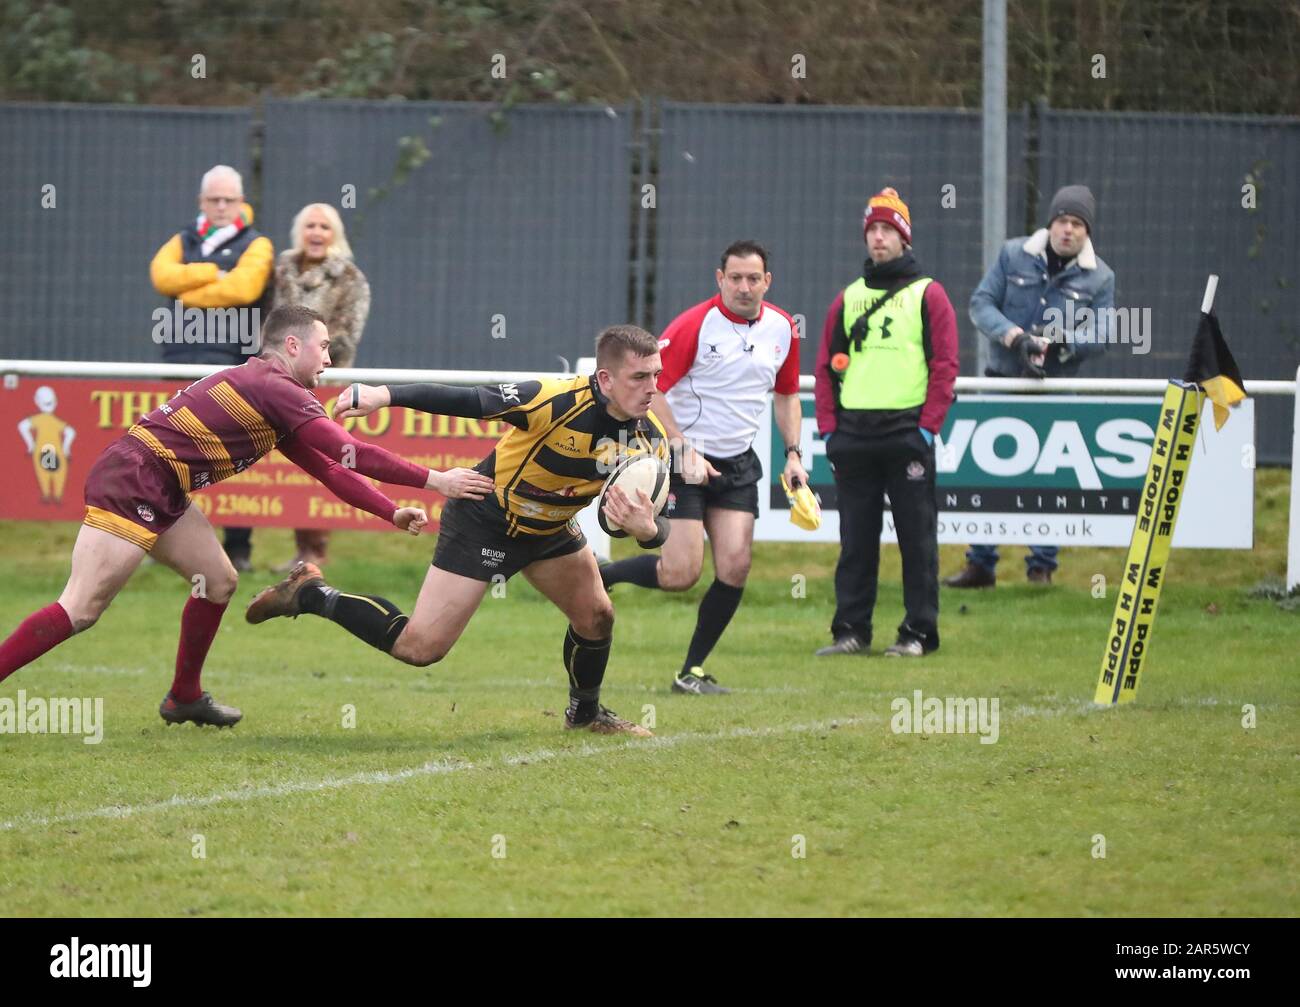 25.01.2020, Hinckley, Leicester, England. Rugby Union, Hinckley rfc v Sedgley Park rfc.   Callum Dacey starts the Hinckley scoring rout in the second half going over over in the 47t minute of the RFU National League 2 North (NL2N) game played at the Leicester  Road Stadium. Stock Photo